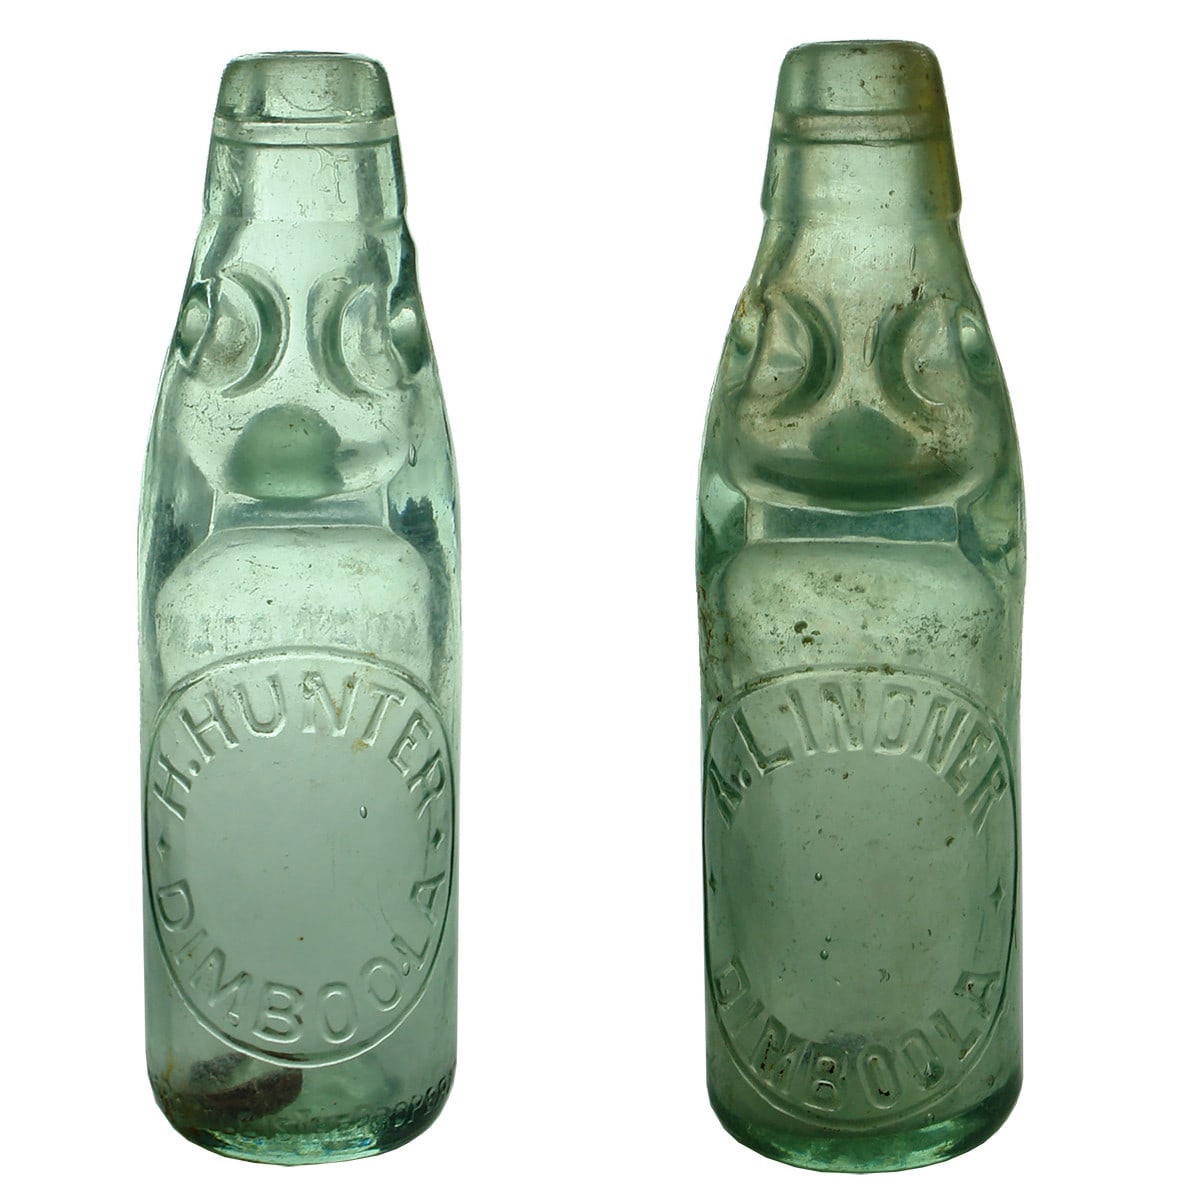 2 Codds: H. Hunter and A. Lindner, Dimboola. 6 oz. Soda Water. (Victoria)